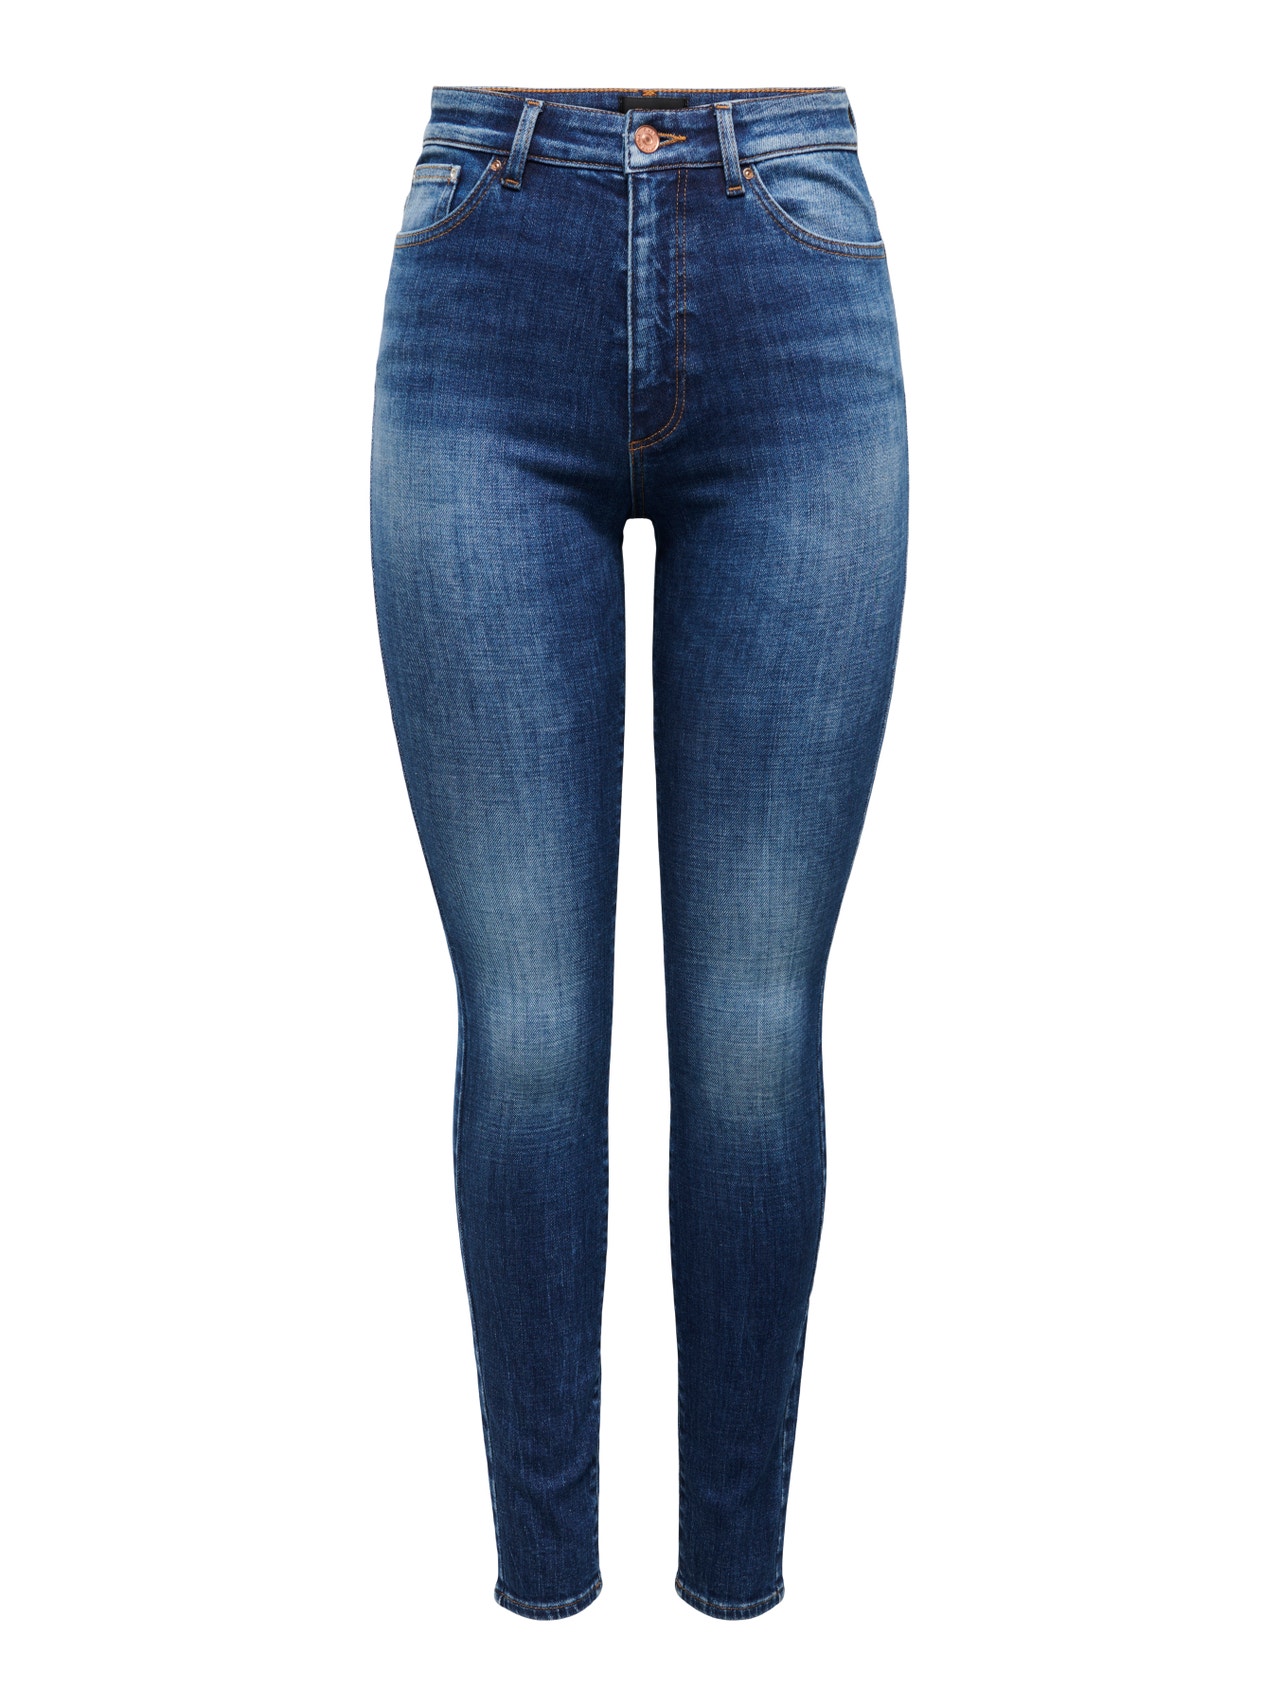 Skinny Fit Hohe Taille Jeans | Dunkelblau | ONLY®